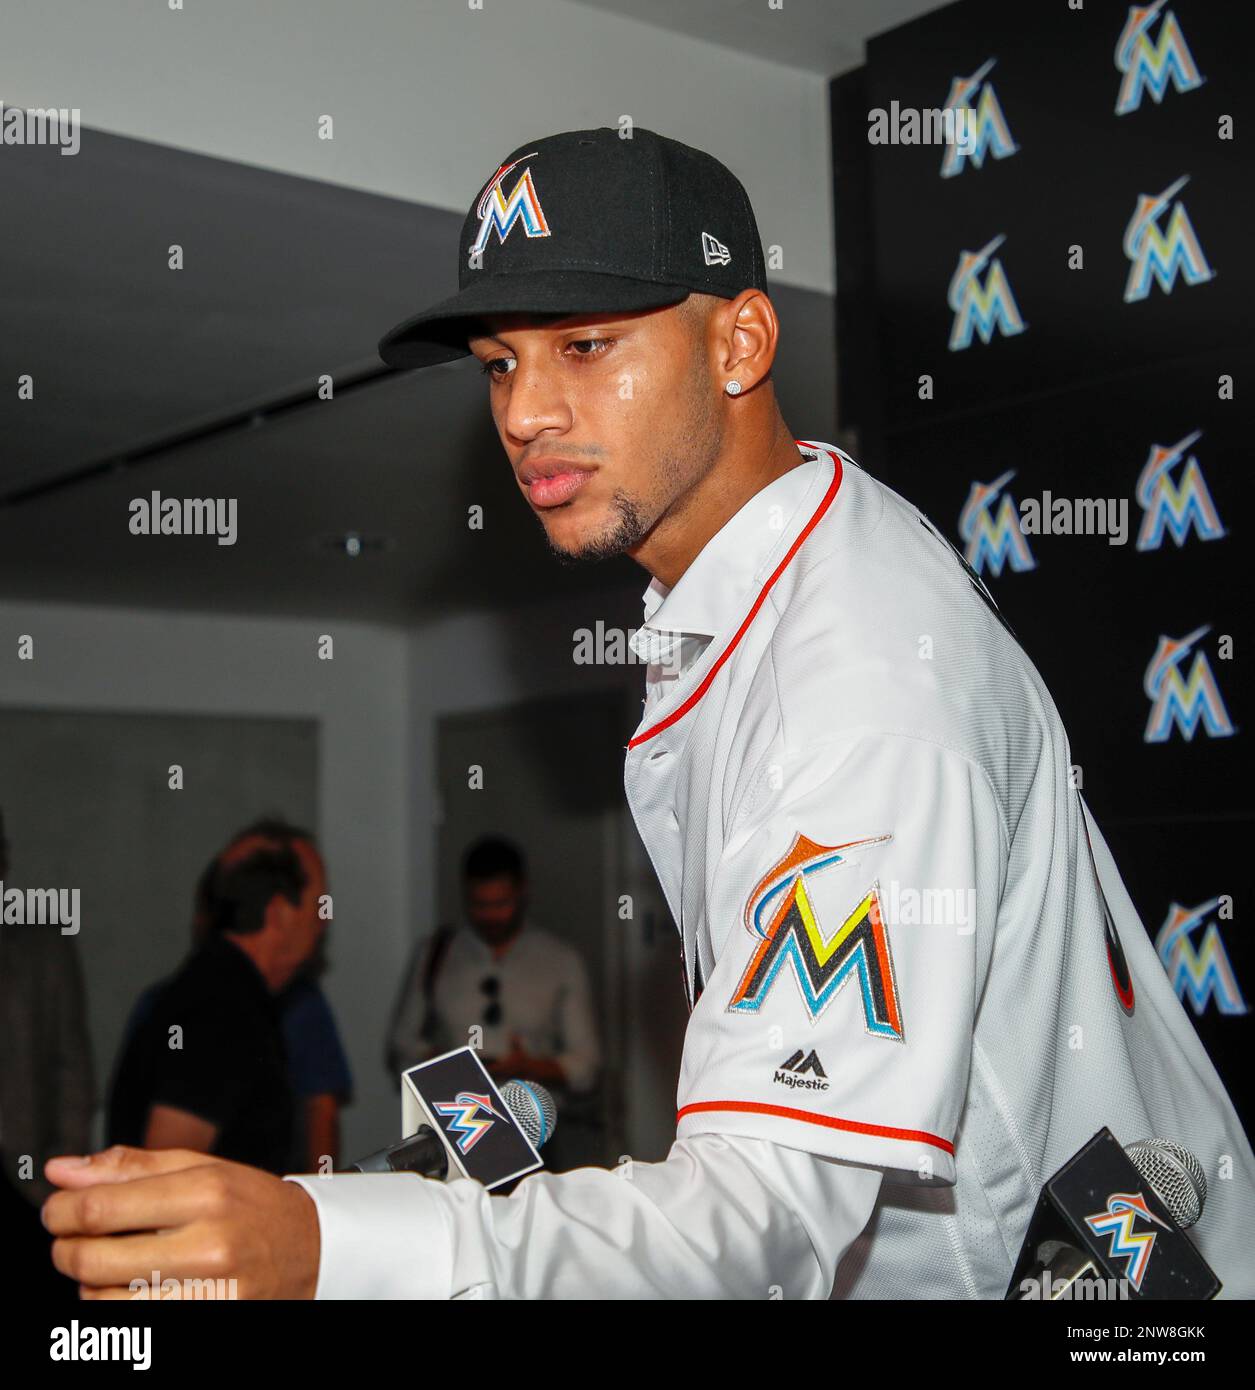 This is a 2019 photo of Victor Victor Mesa of the Miami Marlins